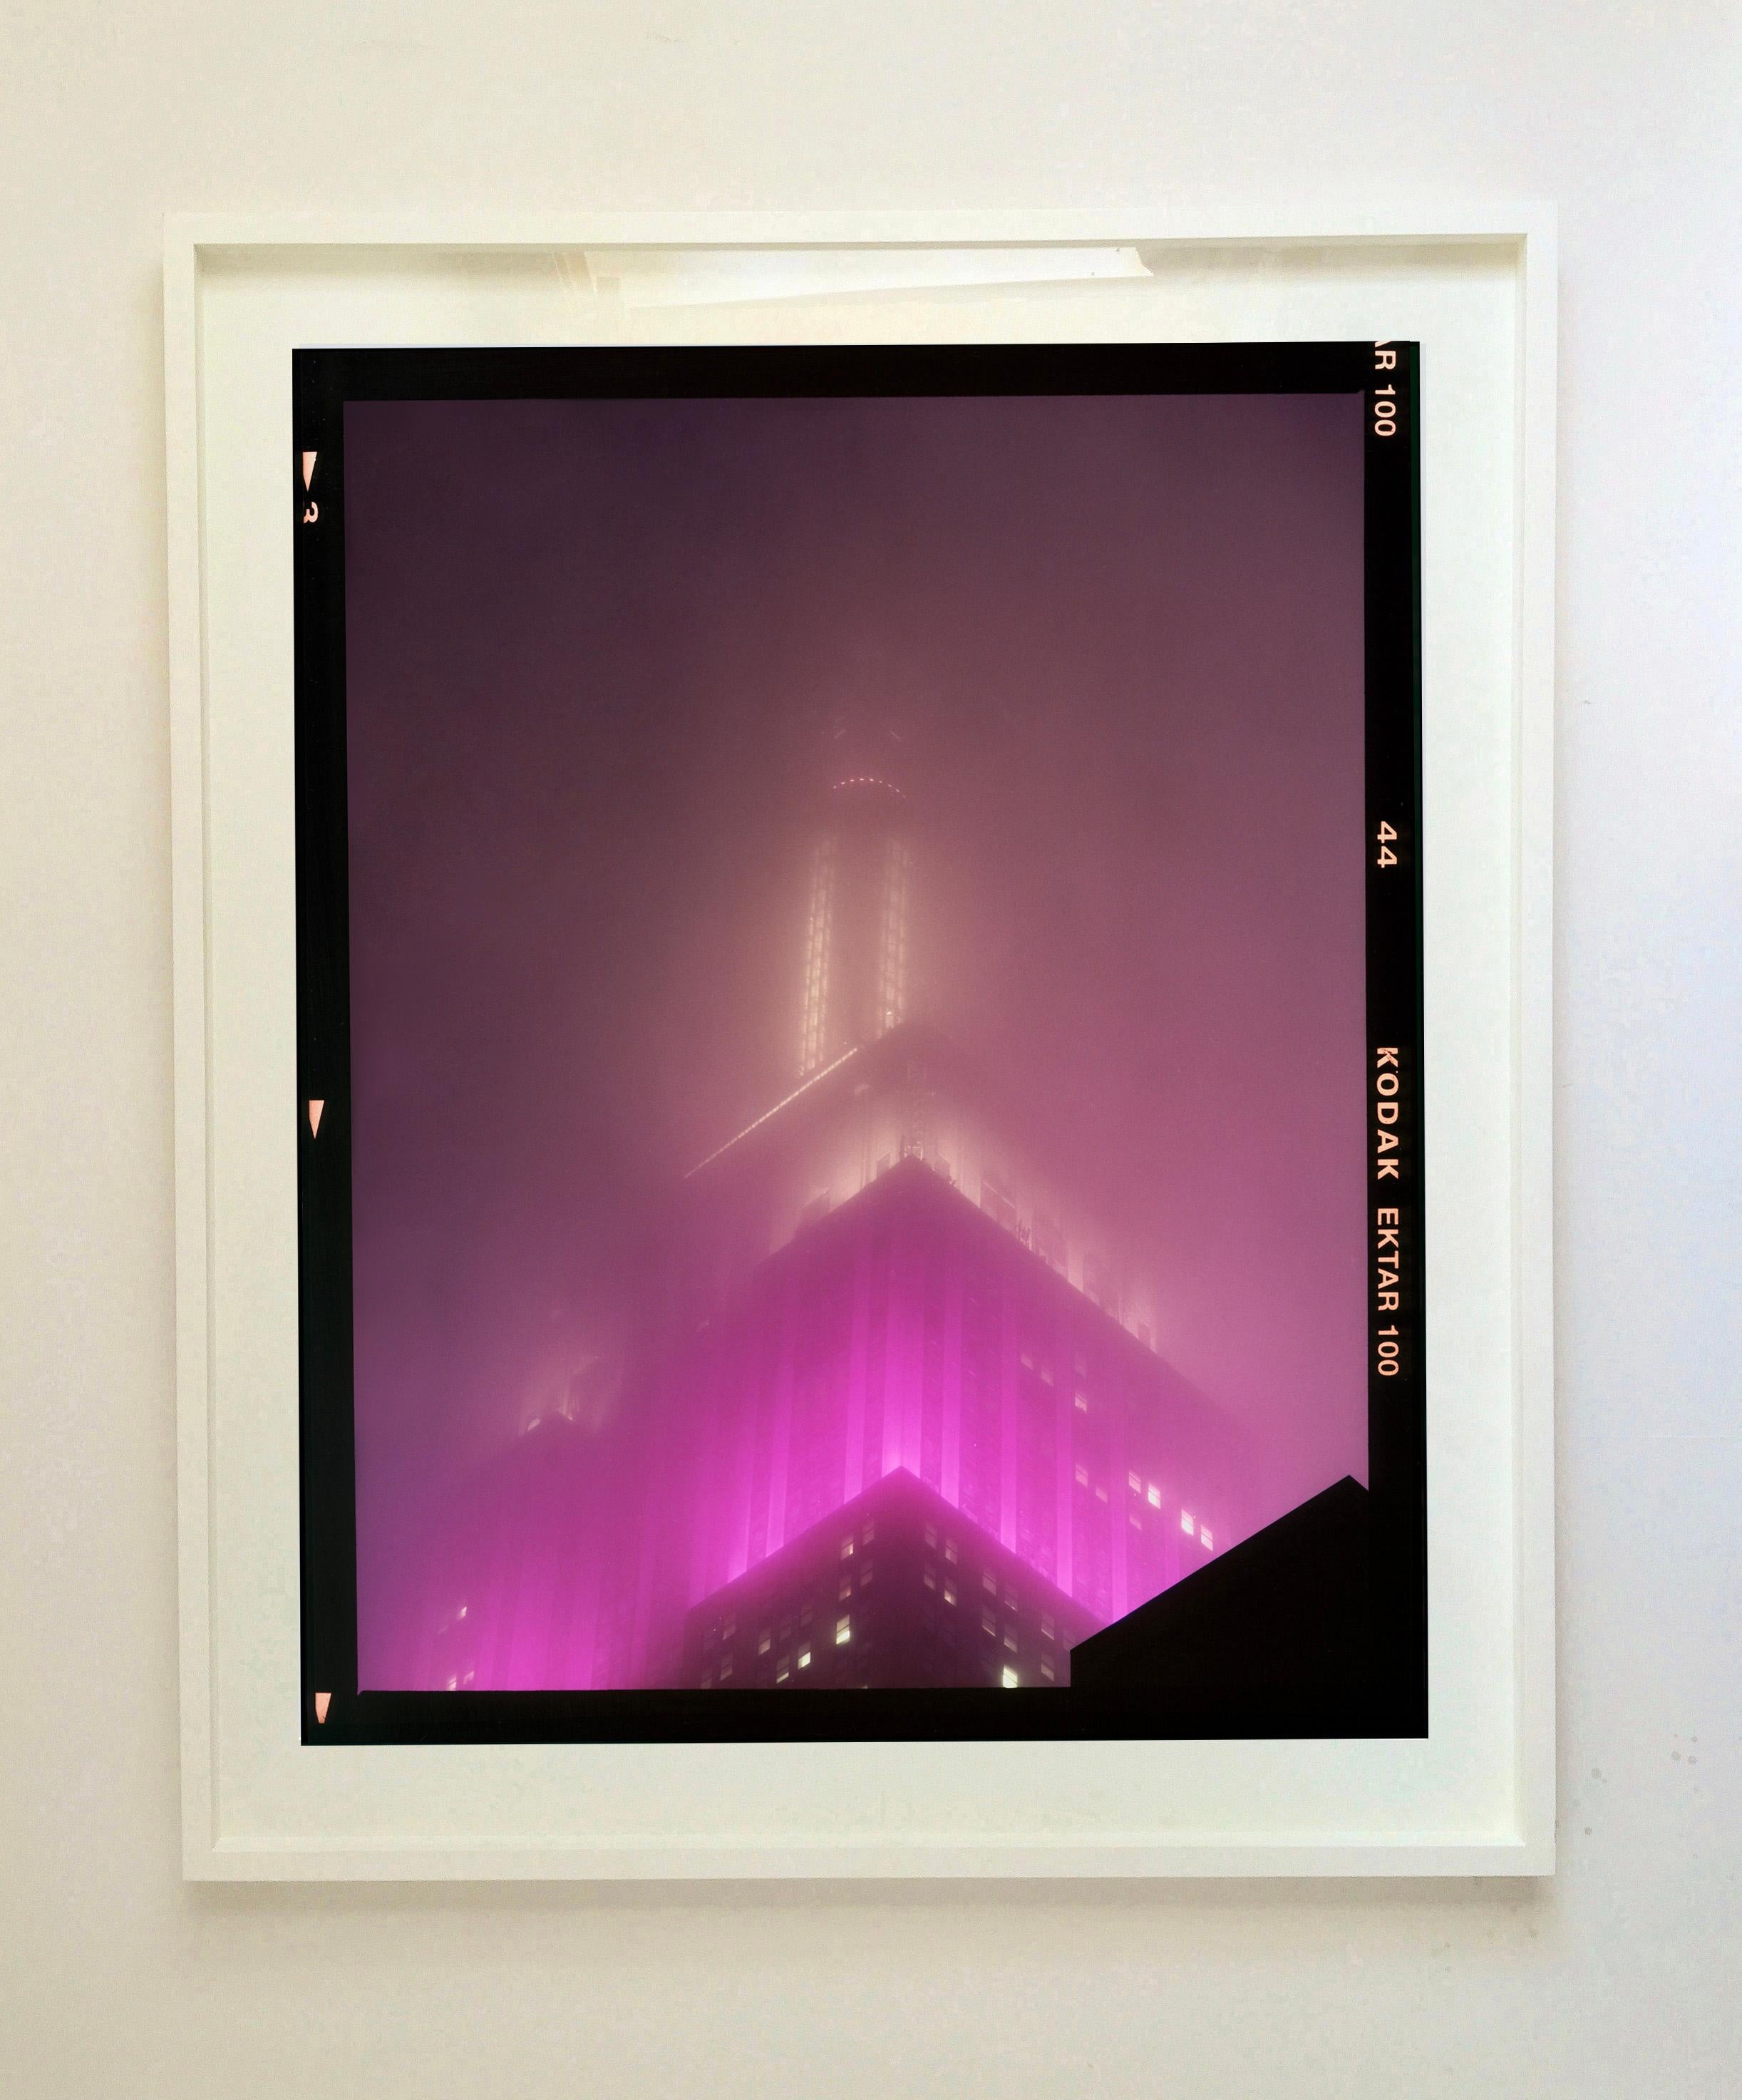 NOMAD IX (Film Rebate), New York - Conceptual Architectural Color Photography - Contemporary Print by Richard Heeps